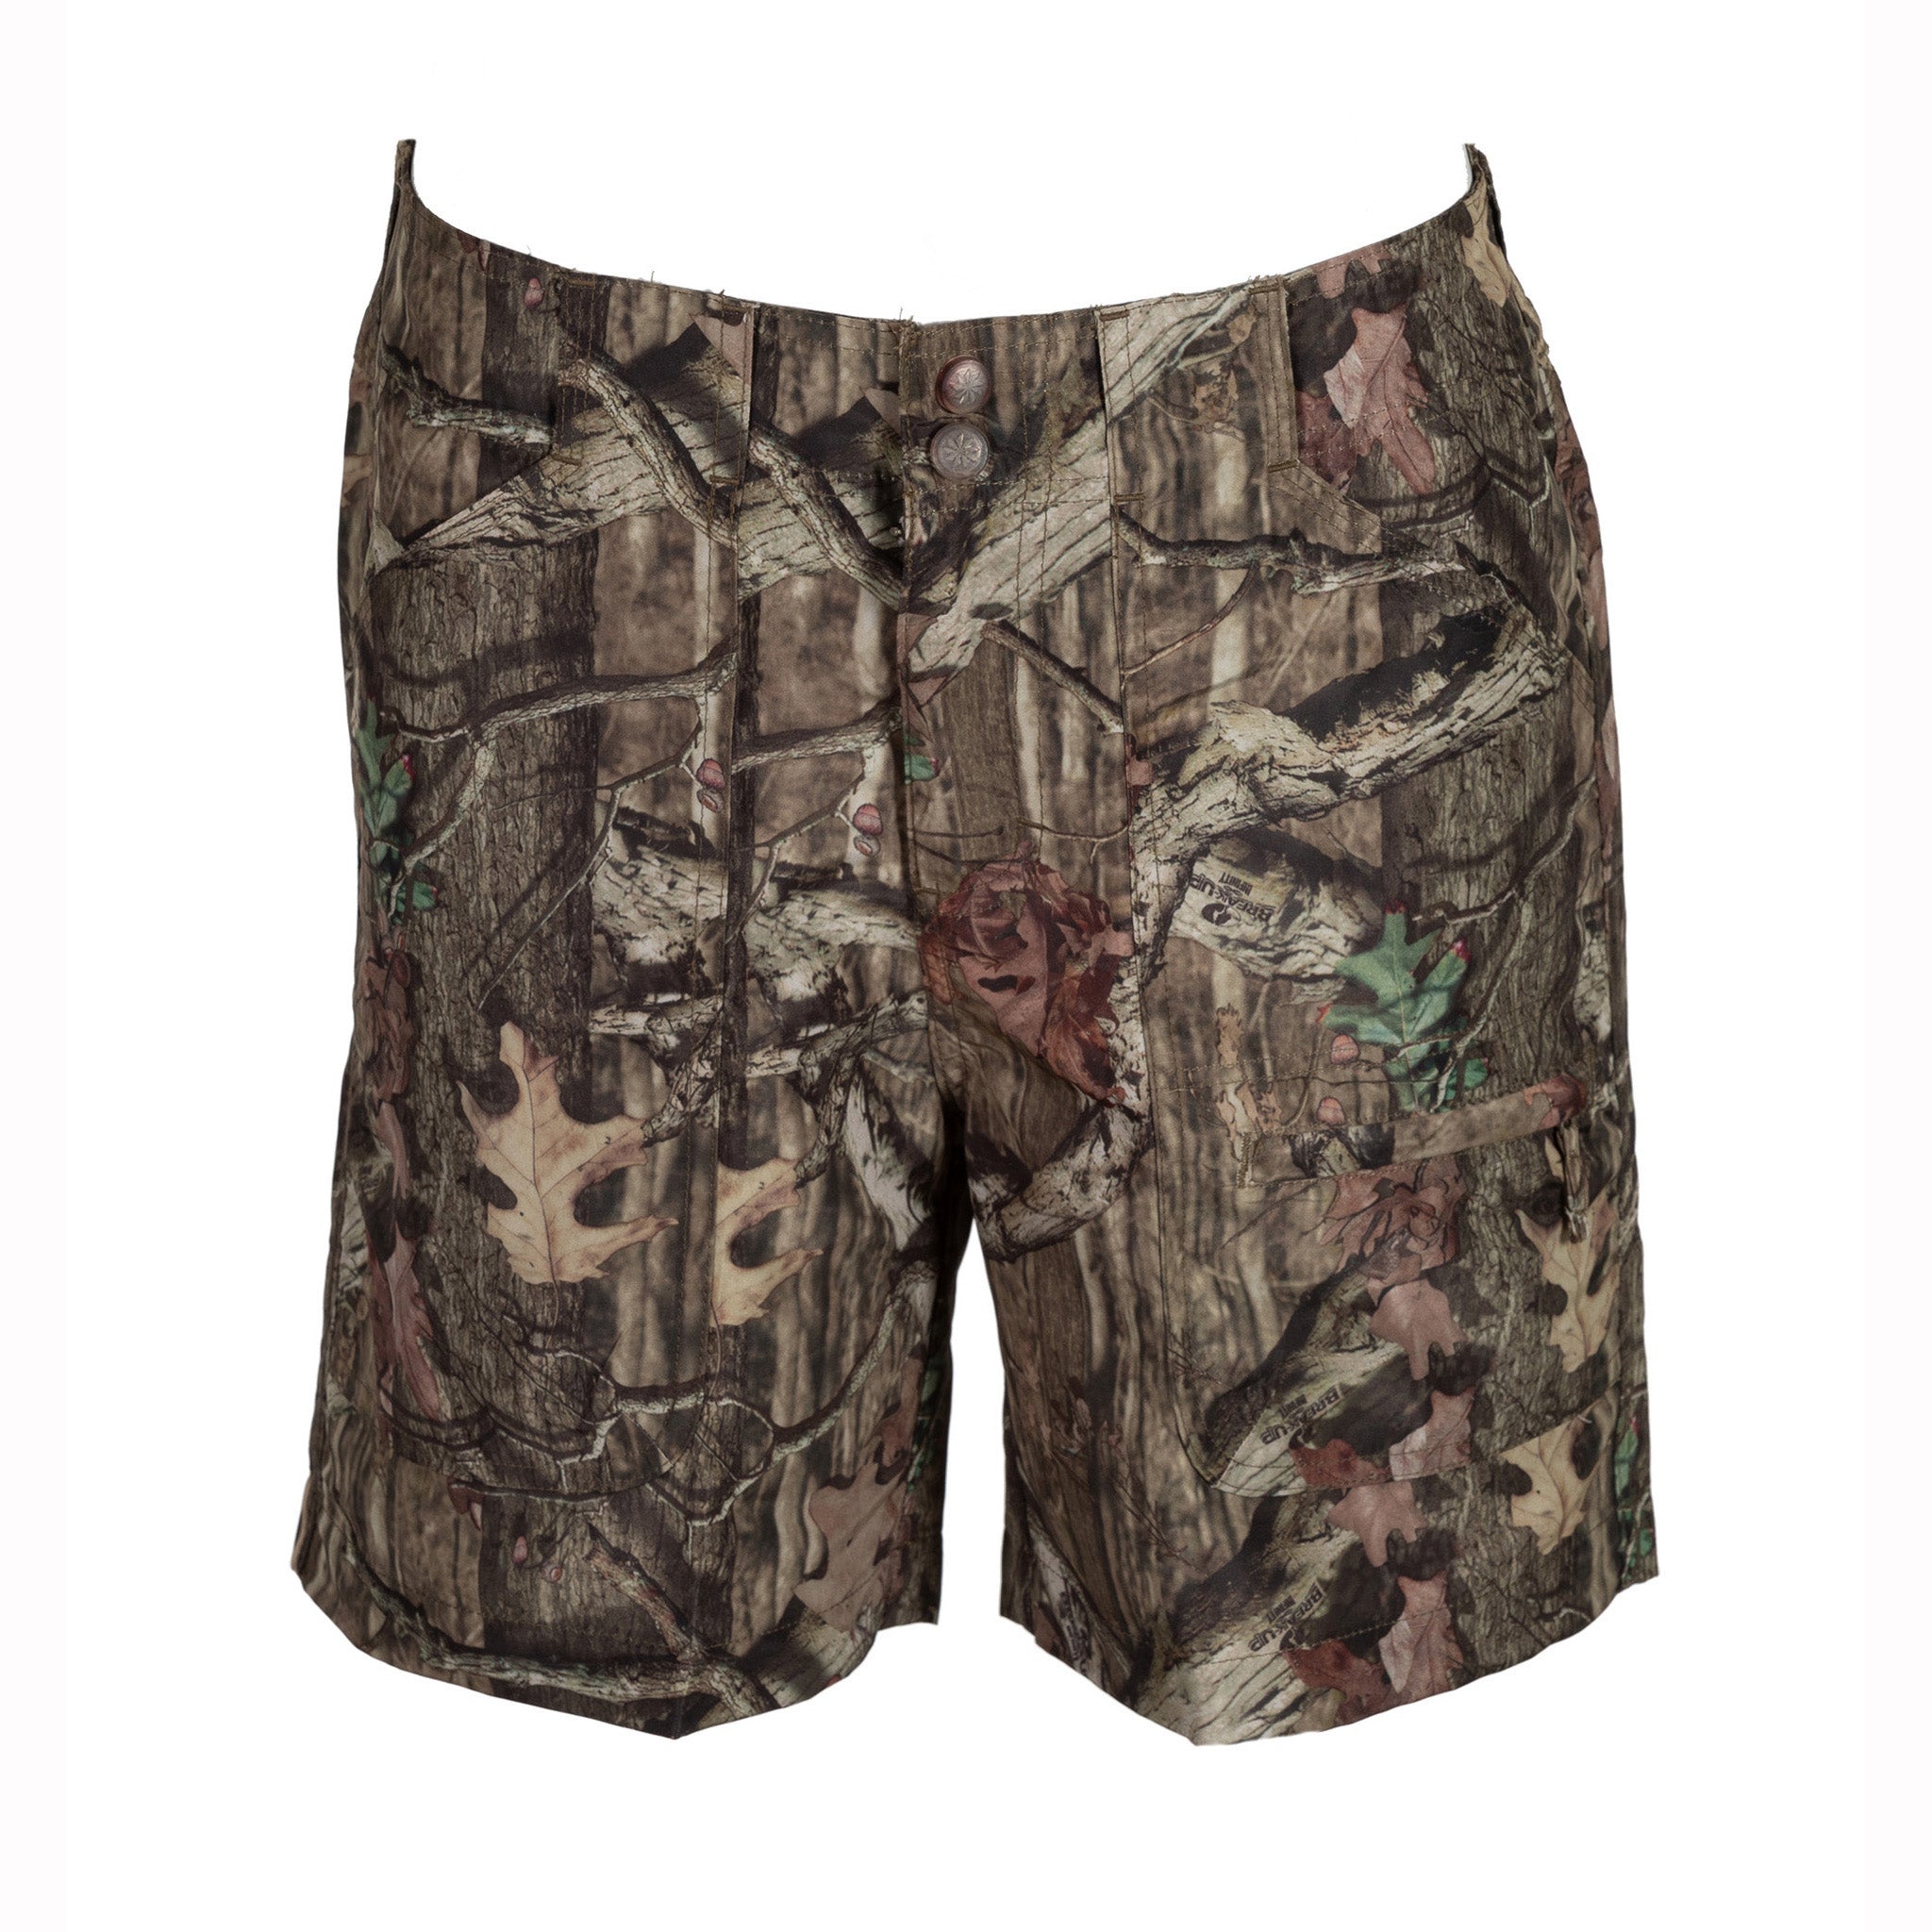  Mossy Oak Standard Womens Fishing Shorts, Athletic Swim, Surf,  and Quick Dry, Anthracite, Small : Sports & Outdoors